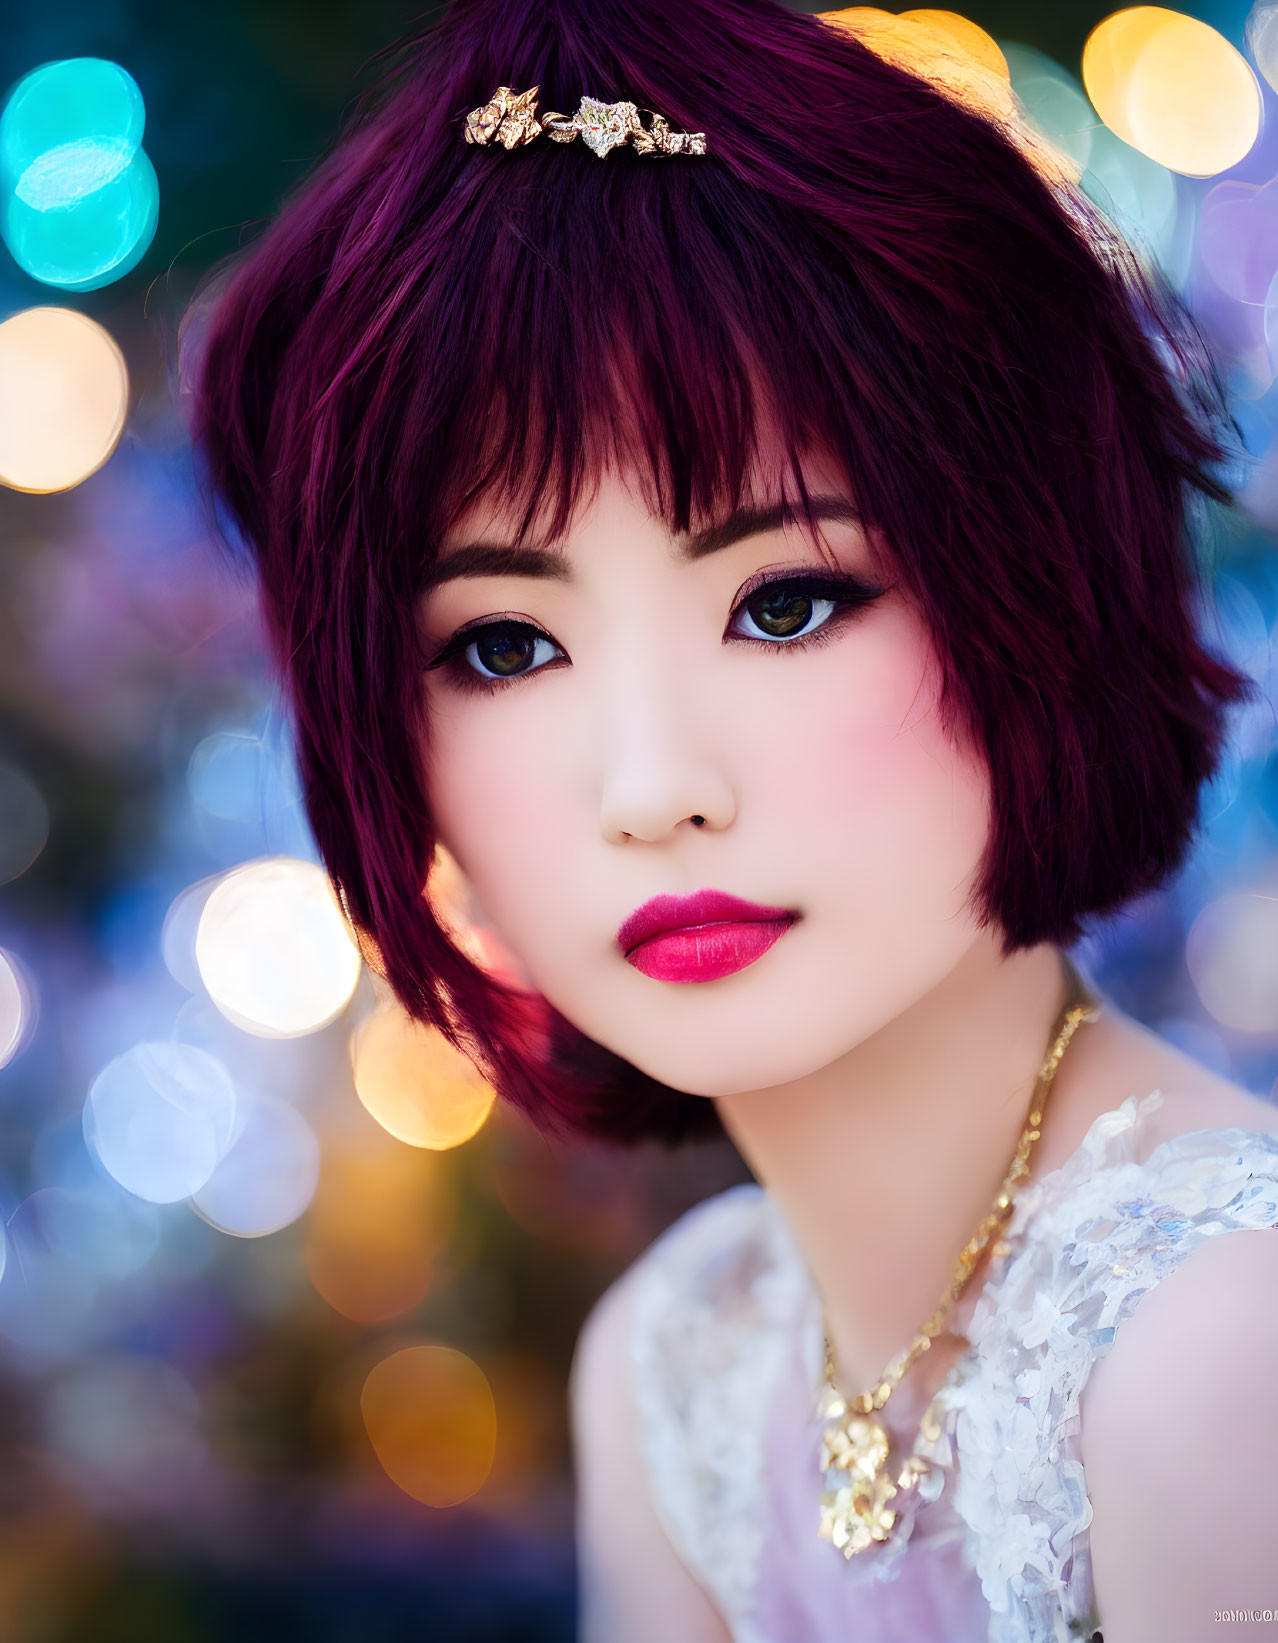 Short Purple-Haired Woman with Gold Necklace and Hair Clip in Bokeh Lights